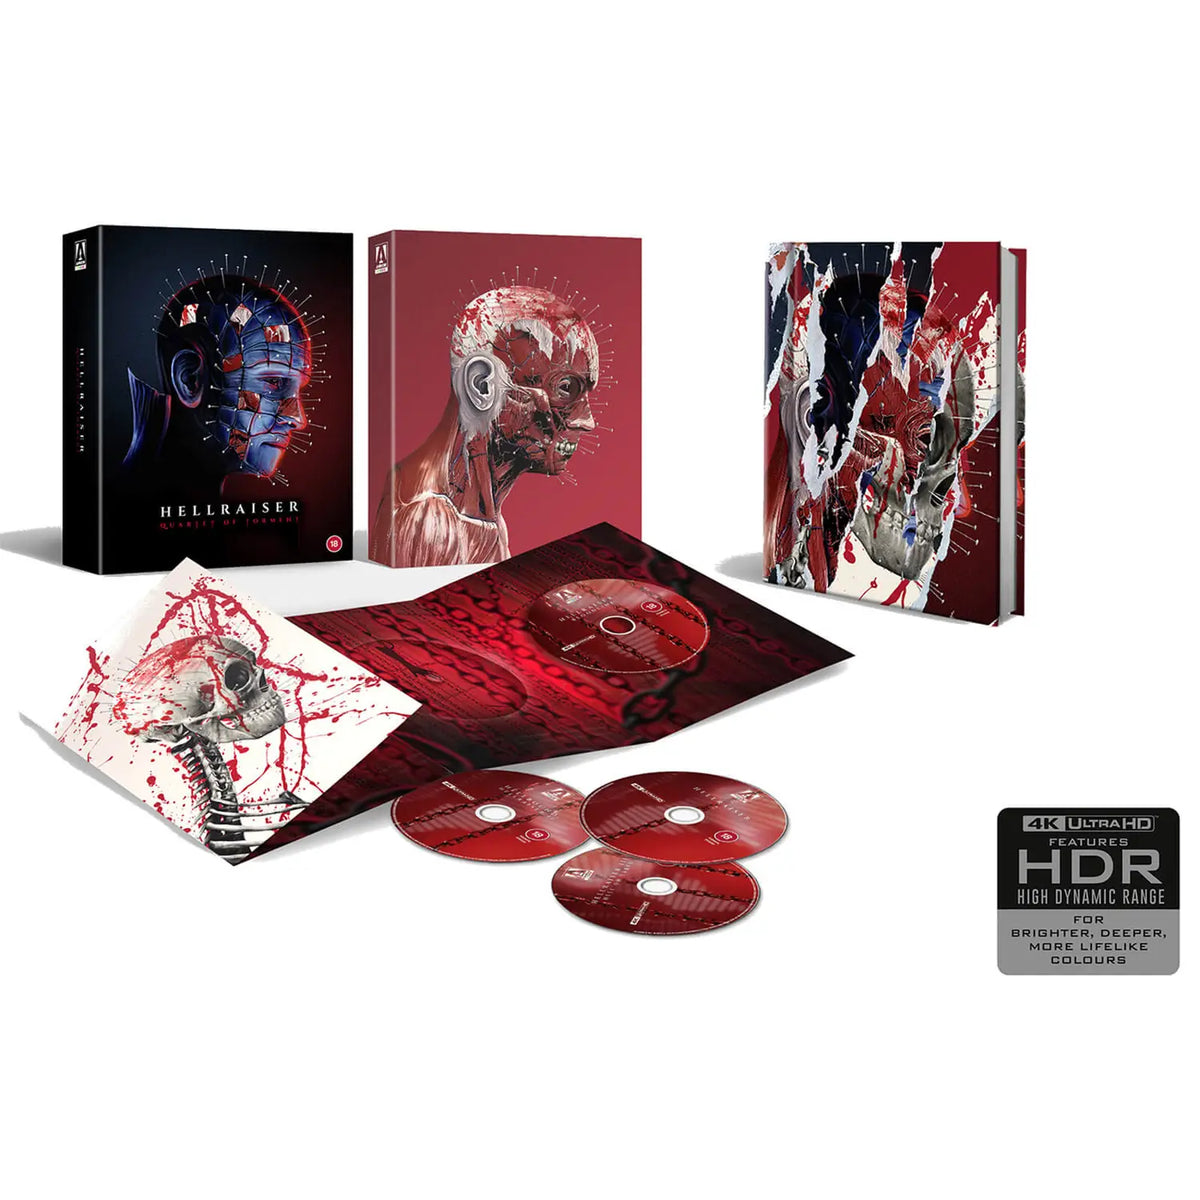 Hellraiser Quartet Torment 4k What's in the box edition.